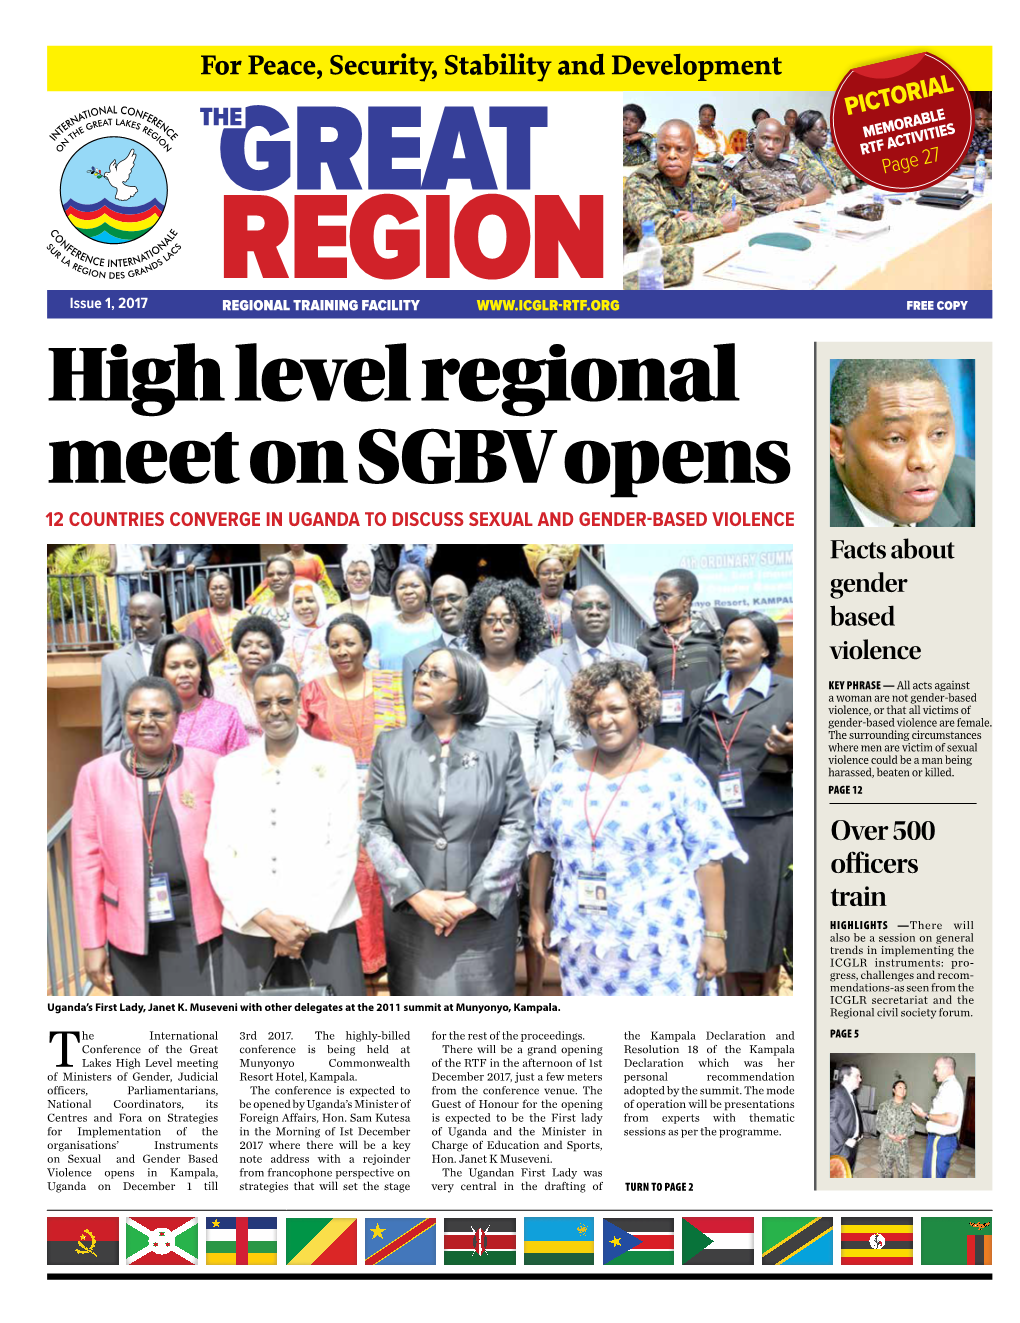 High Level Regional Meet on SGBV Opens 12 Countries Converge in Uganda to Discuss SEXUAL and GENDER-BASED VIOLENCE Facts About Gender Based Violence